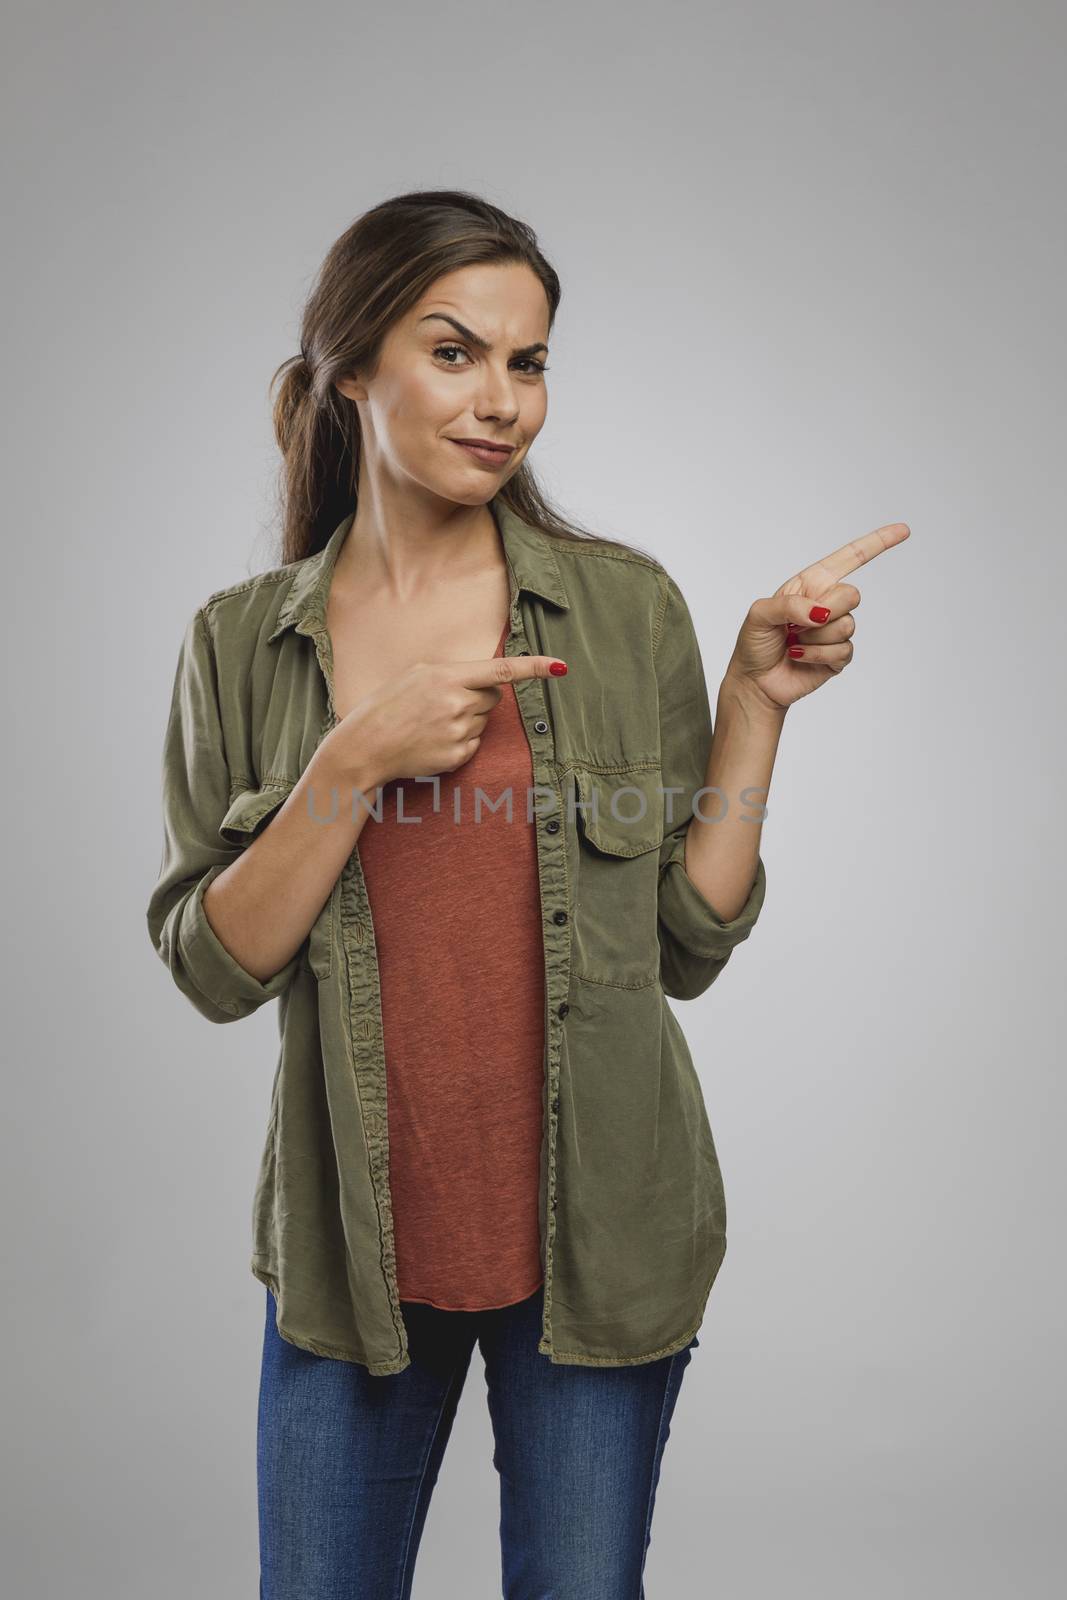 Woman pointing something by Iko